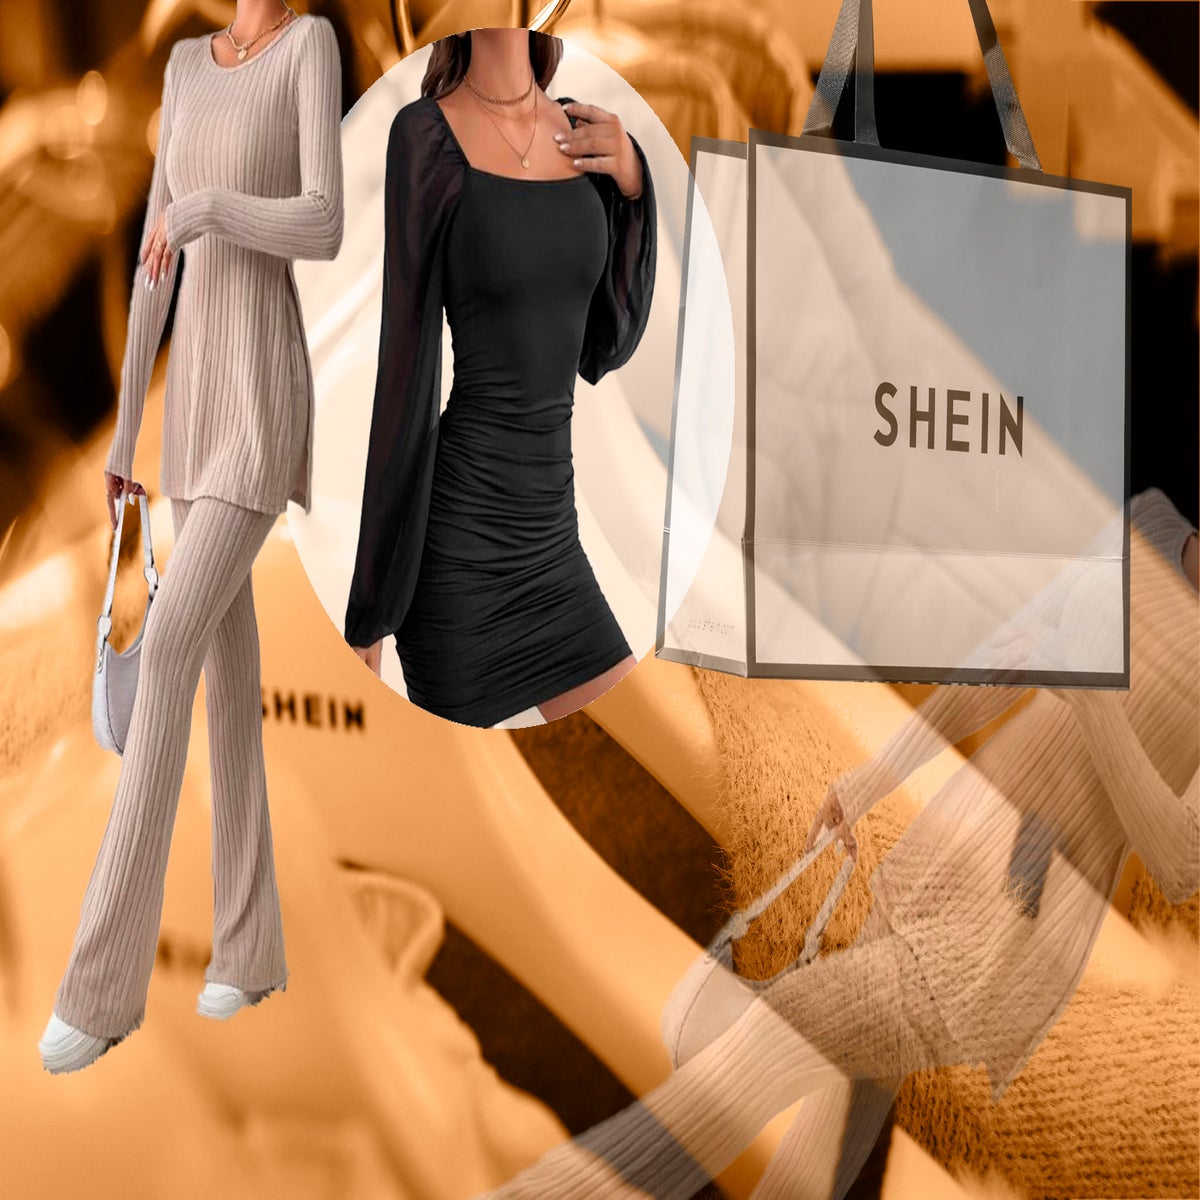 Shein is the fast fashion juggernaut that's only getting bigger – its rise  should concern us all